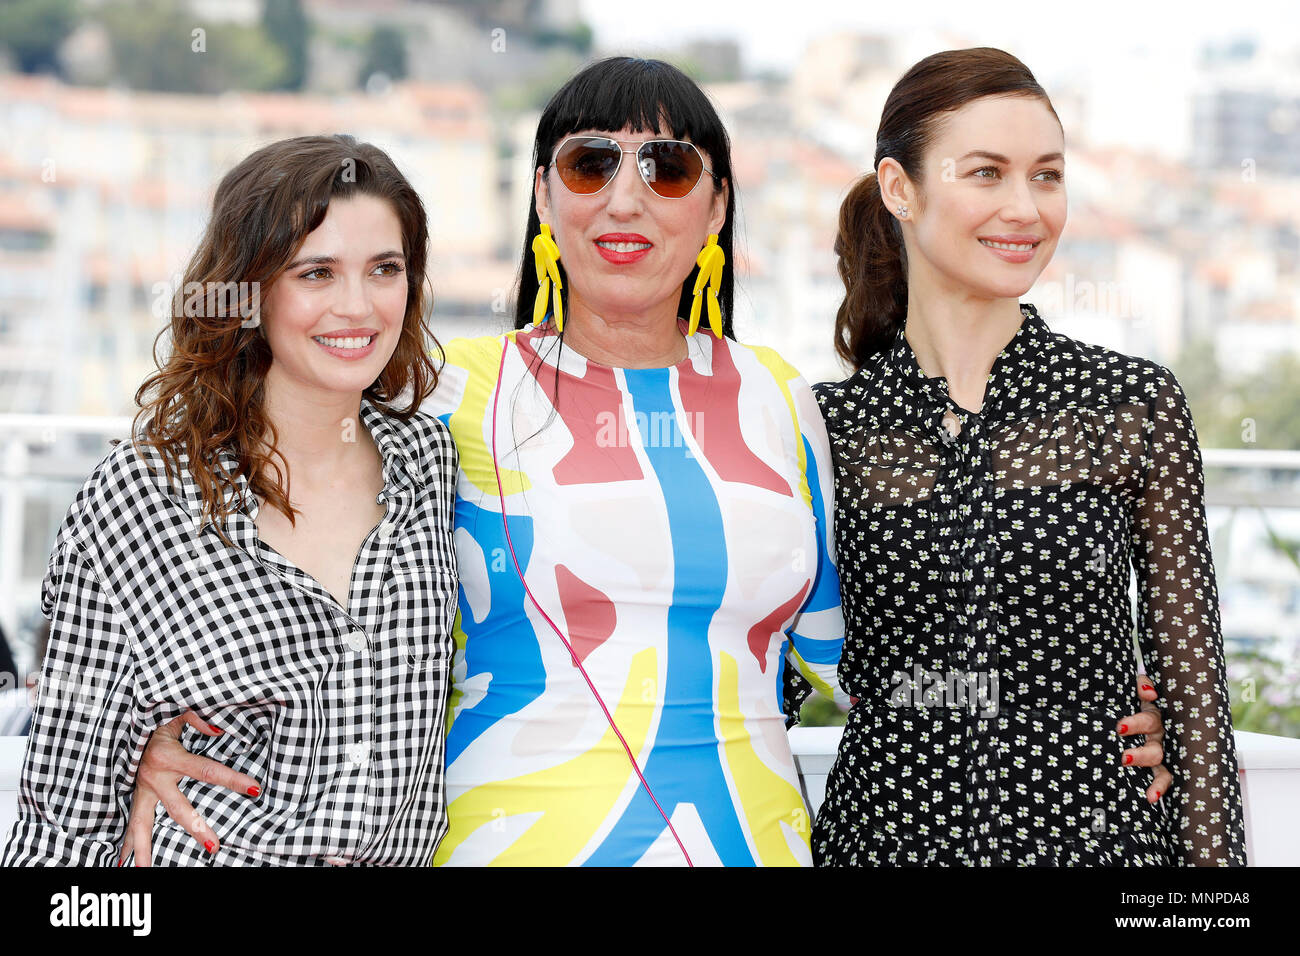 Joana Ribeiro, Rossy de Palma, Olga Kurylenko at the 'The Man Who Killed Don Quixote' photocall during the 71st Cannes Film Festival at the Palais des Festivals on May 19, 2018 in Cannes, France. (c) John Rasimus ***FRANCE, SWEDEN, NORWAY, DENARK, FINLAND, USA, CZECH REPUBLIC, SOUTH AMERICA ONLY*** Stock Photo